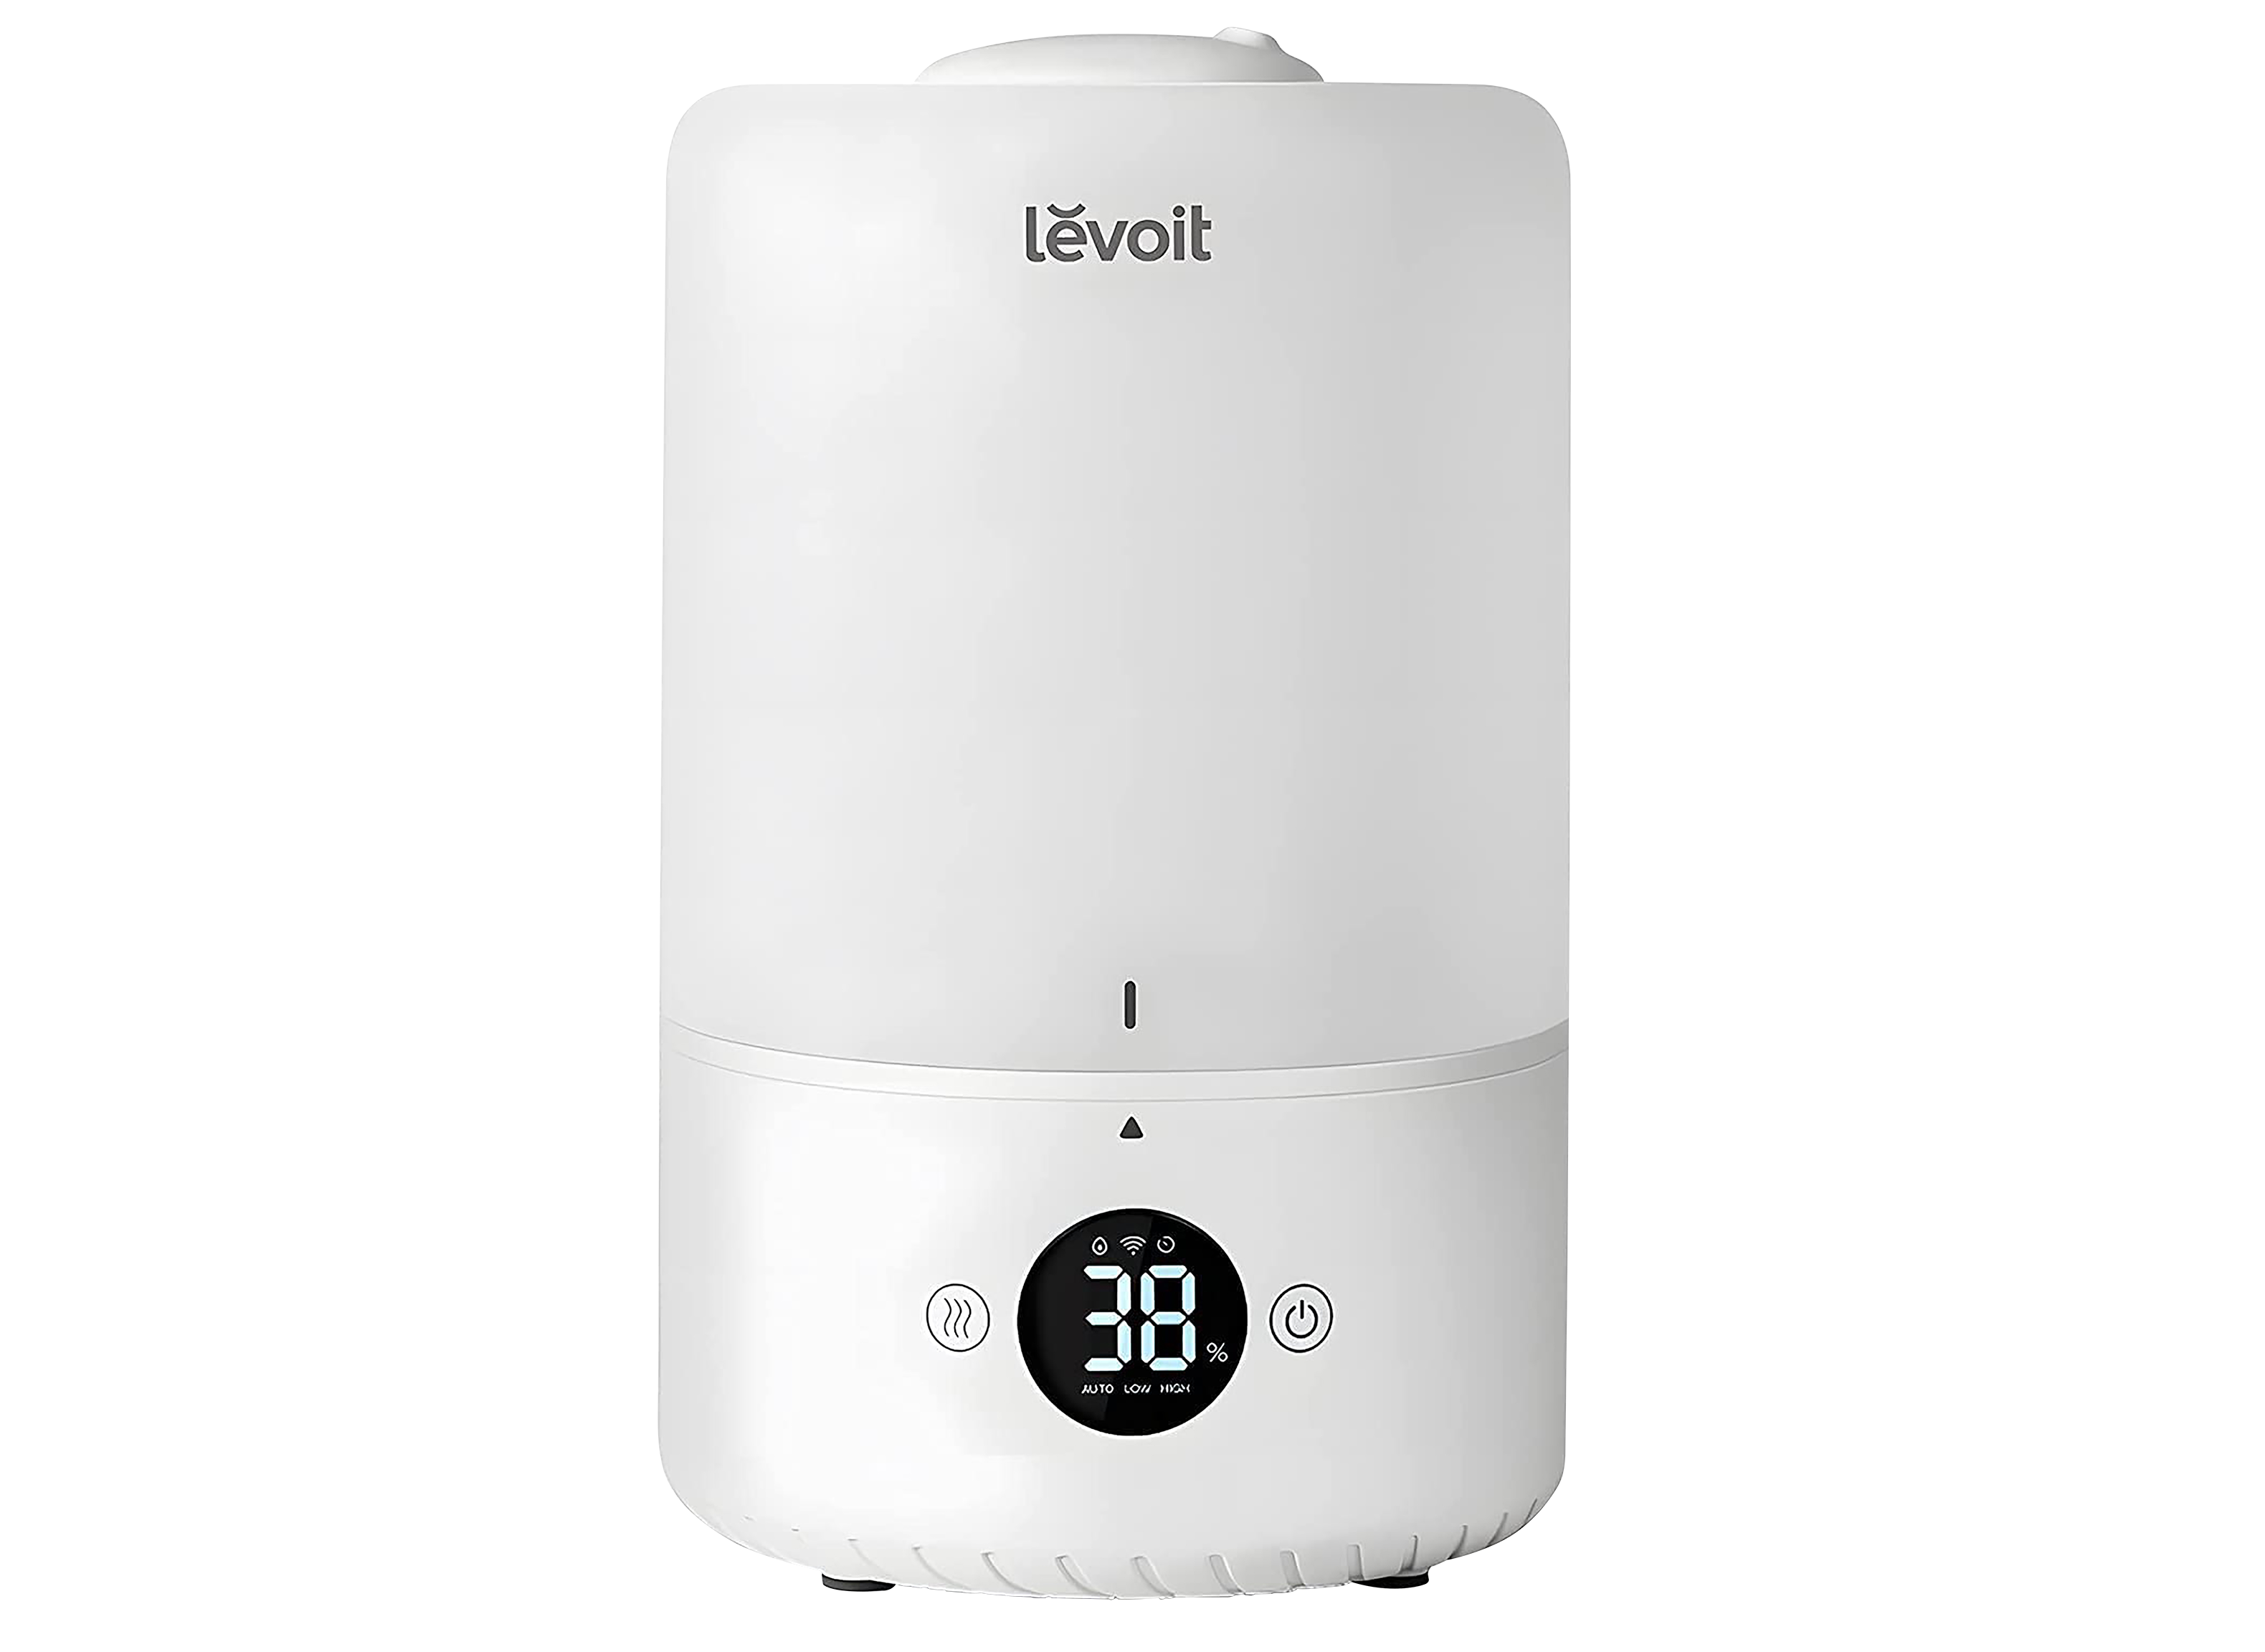 https://crdms.images.consumerreports.org/prod/products/cr/models/404907-medium-room-300-499-sq-ft-levoit-dual-200s-smart-10023726.png